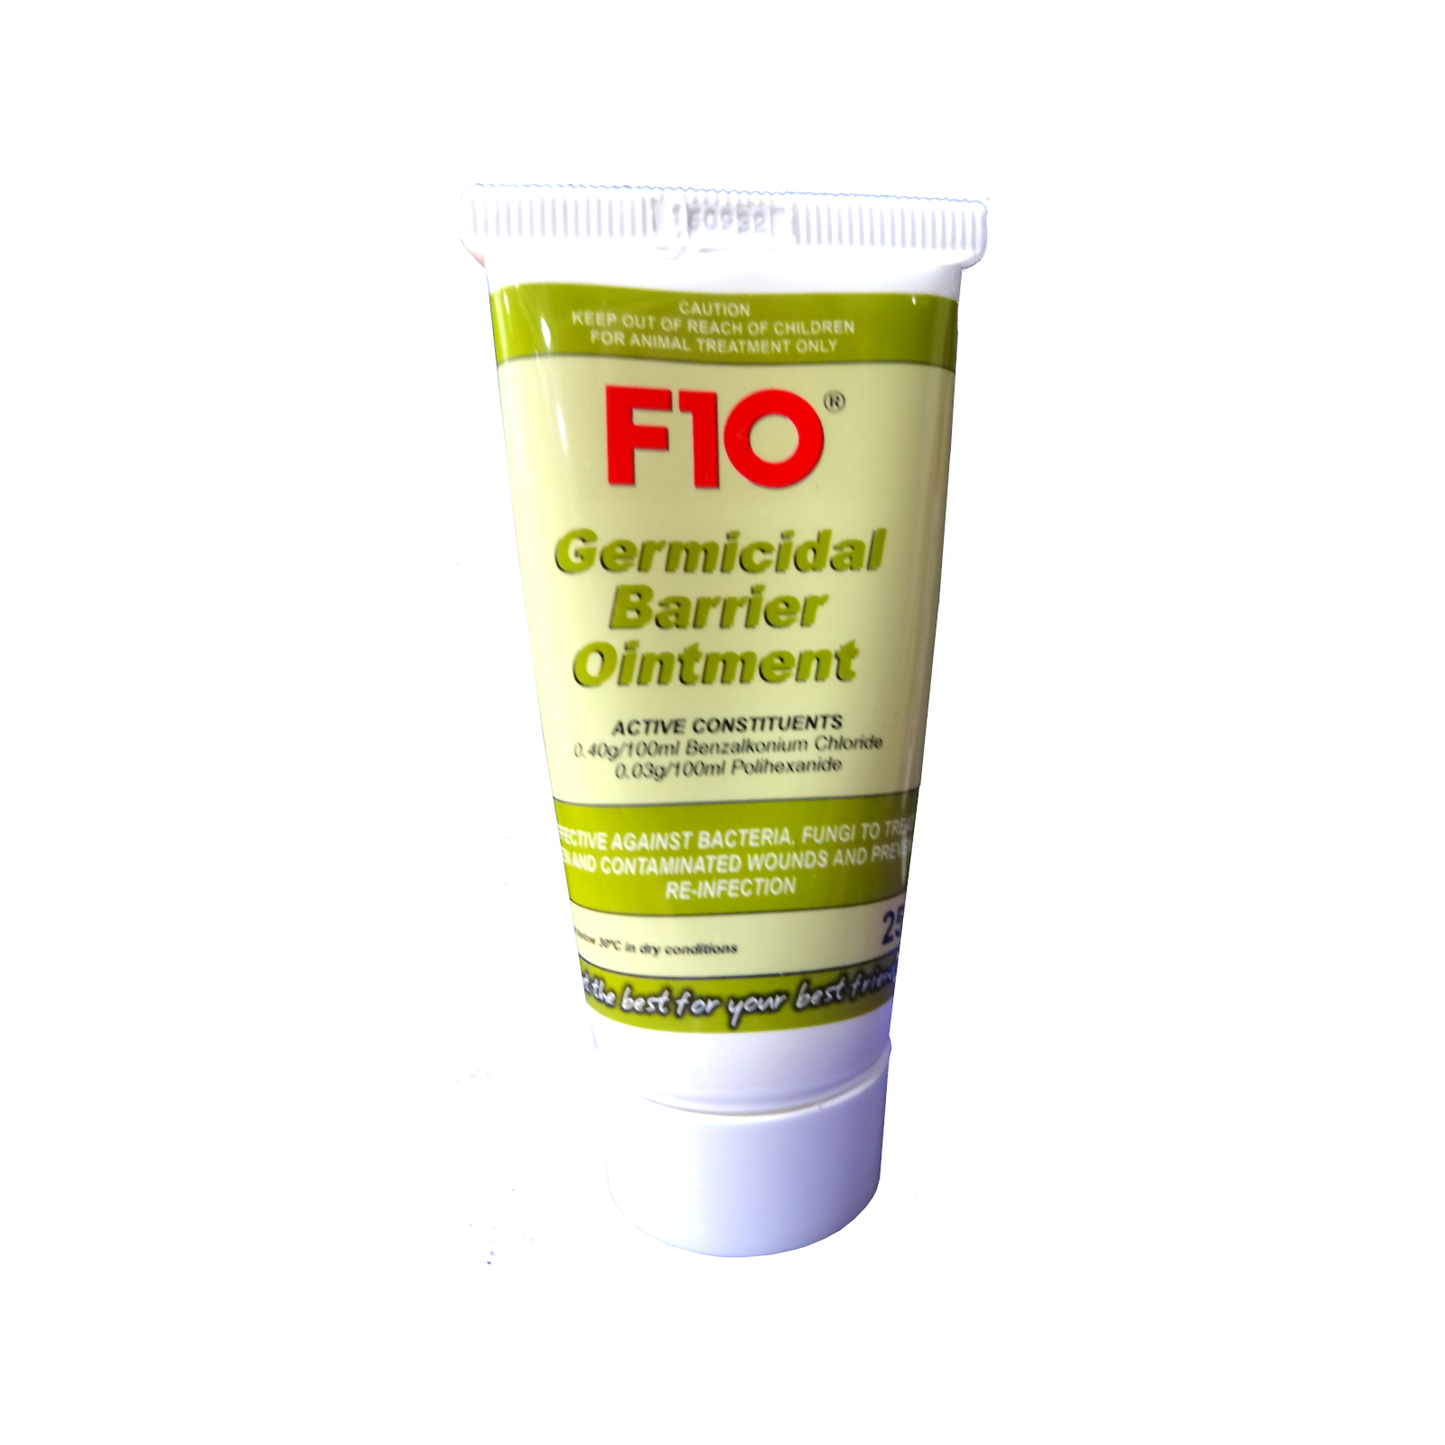 A 25g tube of F10 Germidical Barrier Ointment 